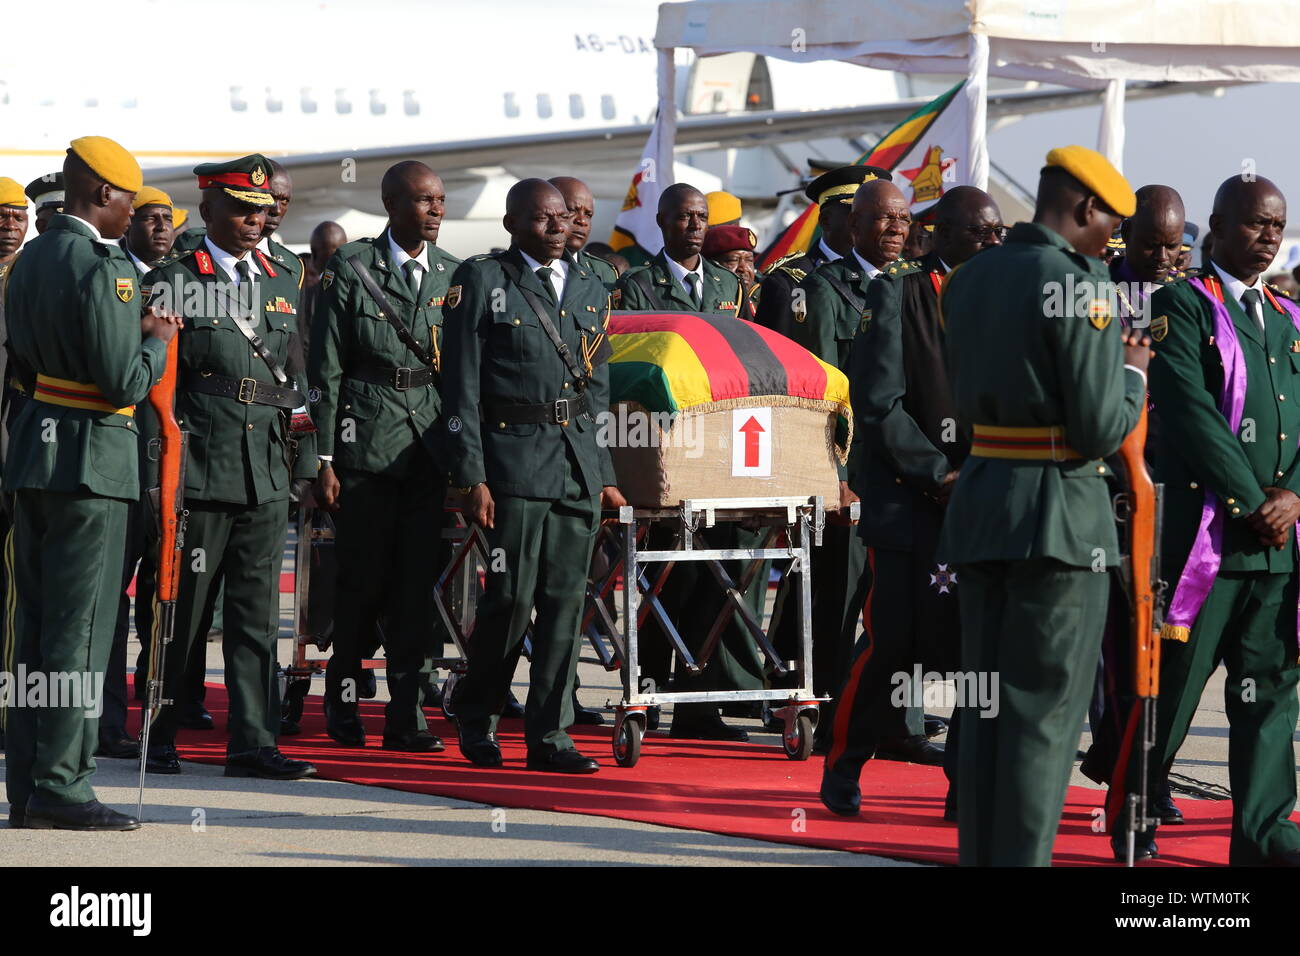 Harare, Zimbabwe. 11th Sep, 2019. The body of the late former Zimbabwean President Robert Mugabe arrives at the Robert Gabriel Mugabe International Airport in Harare, Zimbabwe, on Sept. 11, 2019. The body of the late former Zimbabwean President Robert Mugabe, who died in Singapore last Friday aged 95, arrived in the country on Wednesday afternoon ahead of his burial planned for Sunday. Credit: Chen Yaqin/Xinhua/Alamy Live News Stock Photo